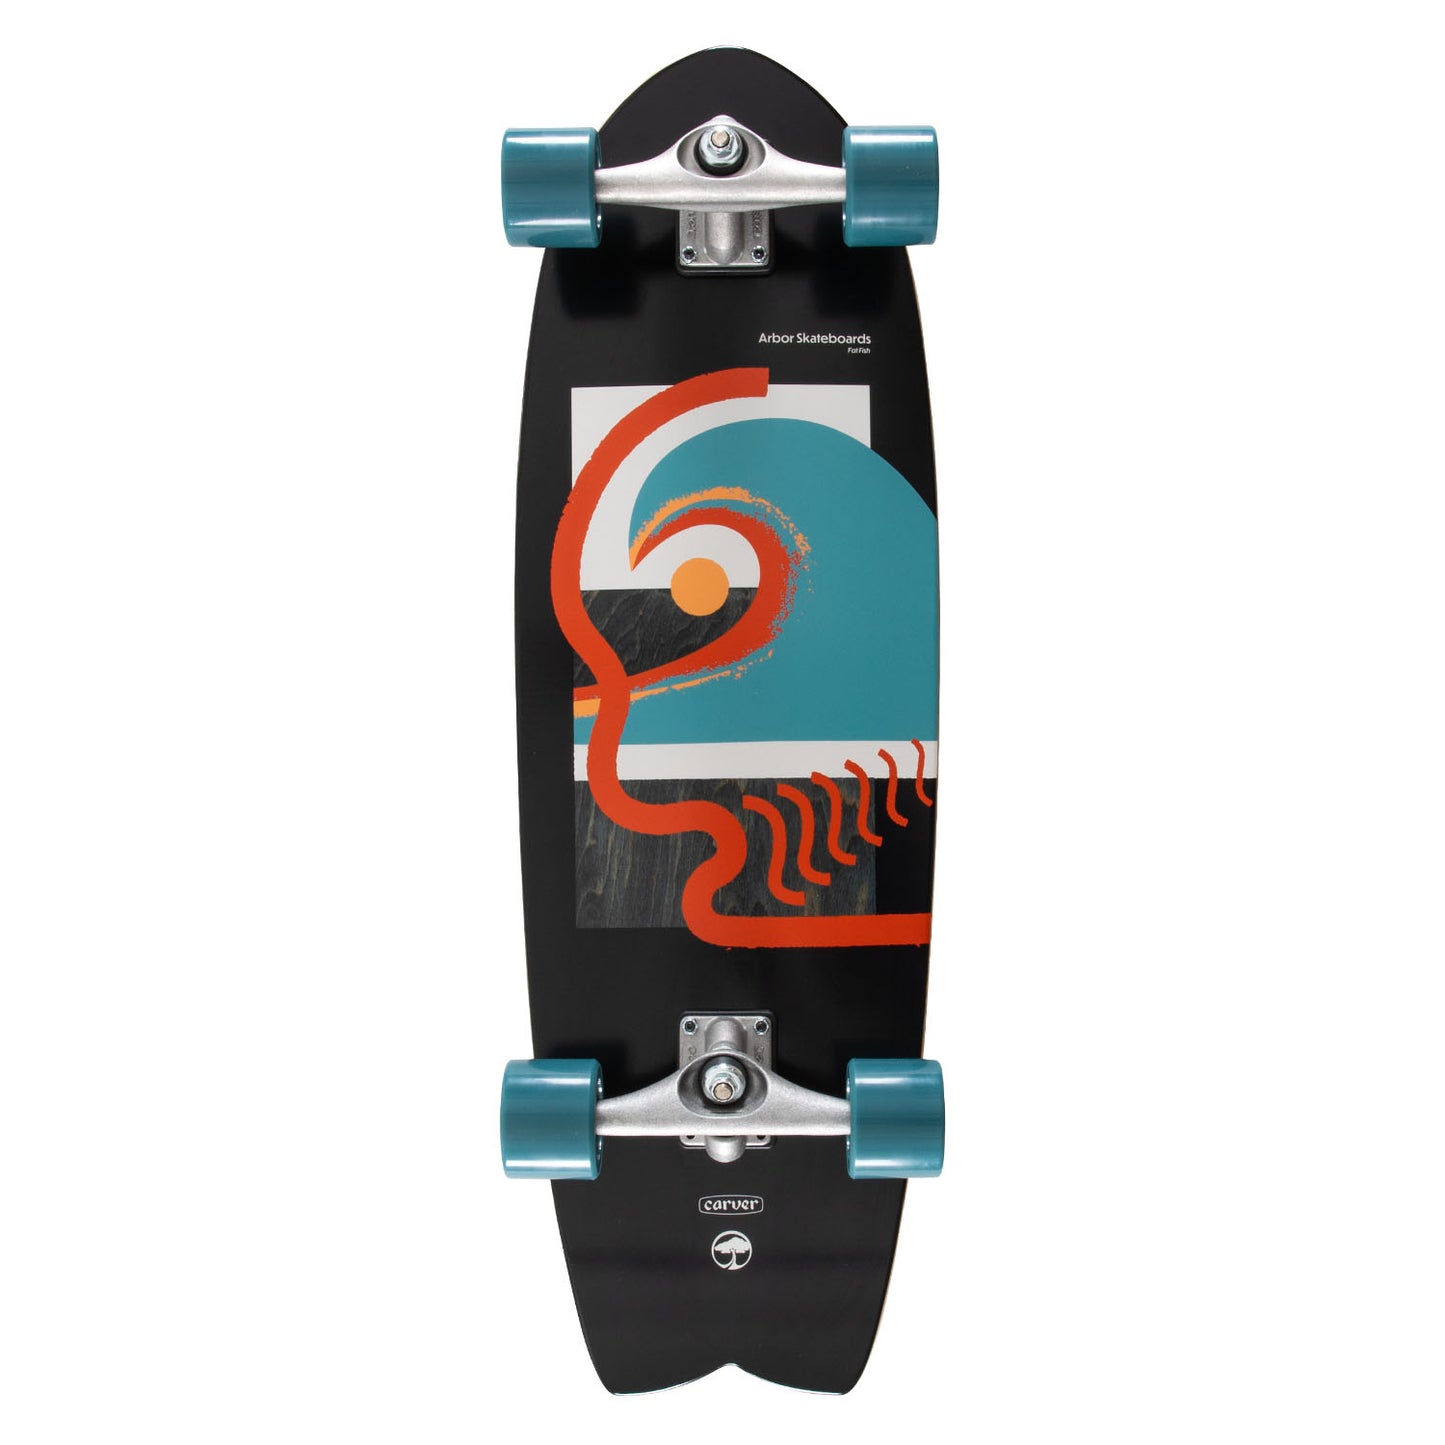 CX Surfskate Fat Fish